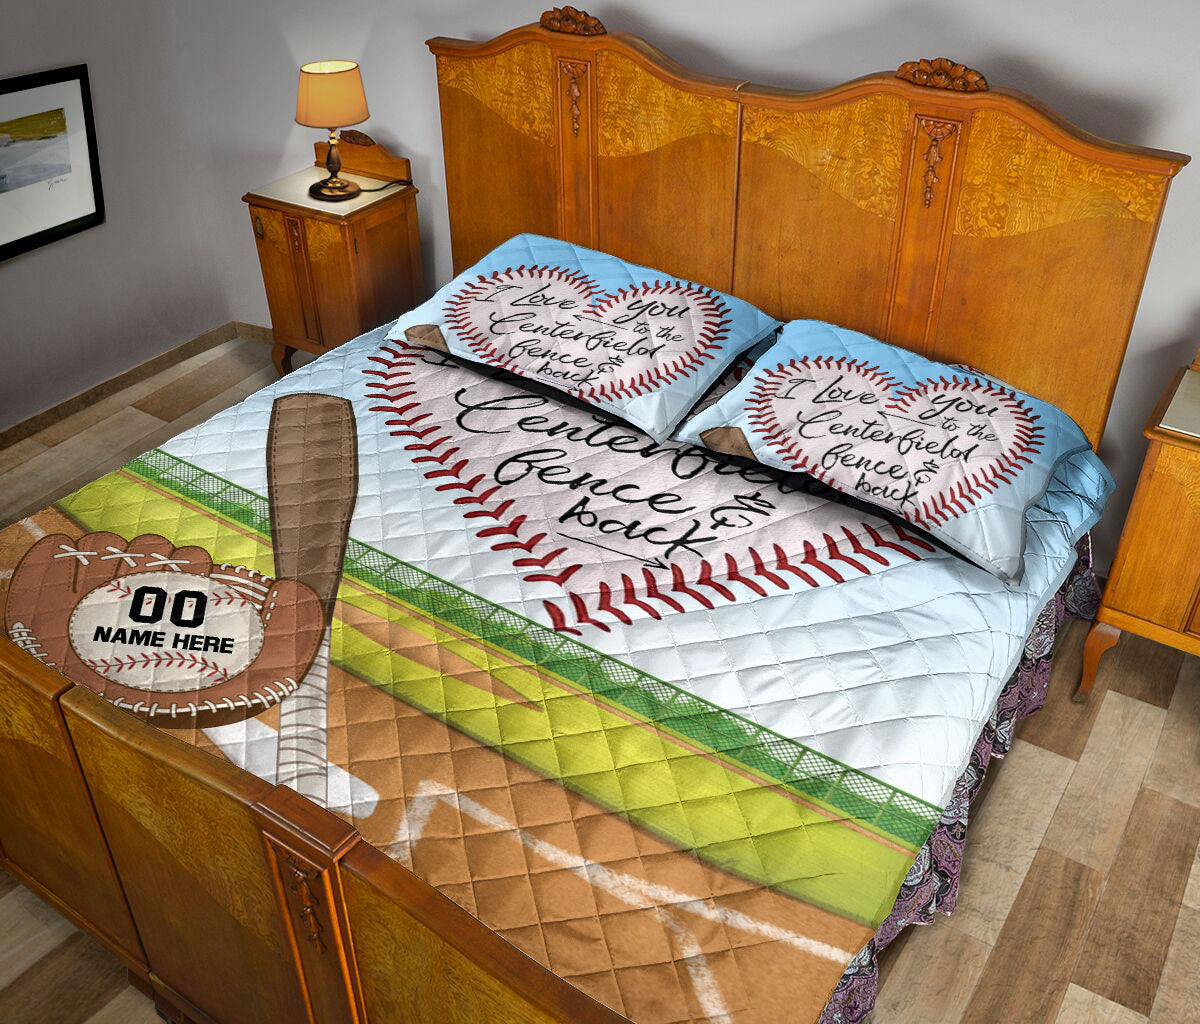 Ohaprints-Quilt-Bed-Set-Pillowcase-Baseball-I-Love-You-To-The-Centerfield-Fence-And-Back-Custom-Personalized-Name-Blanket-Bedspread-Bedding-795-Queen (80'' x 90'')